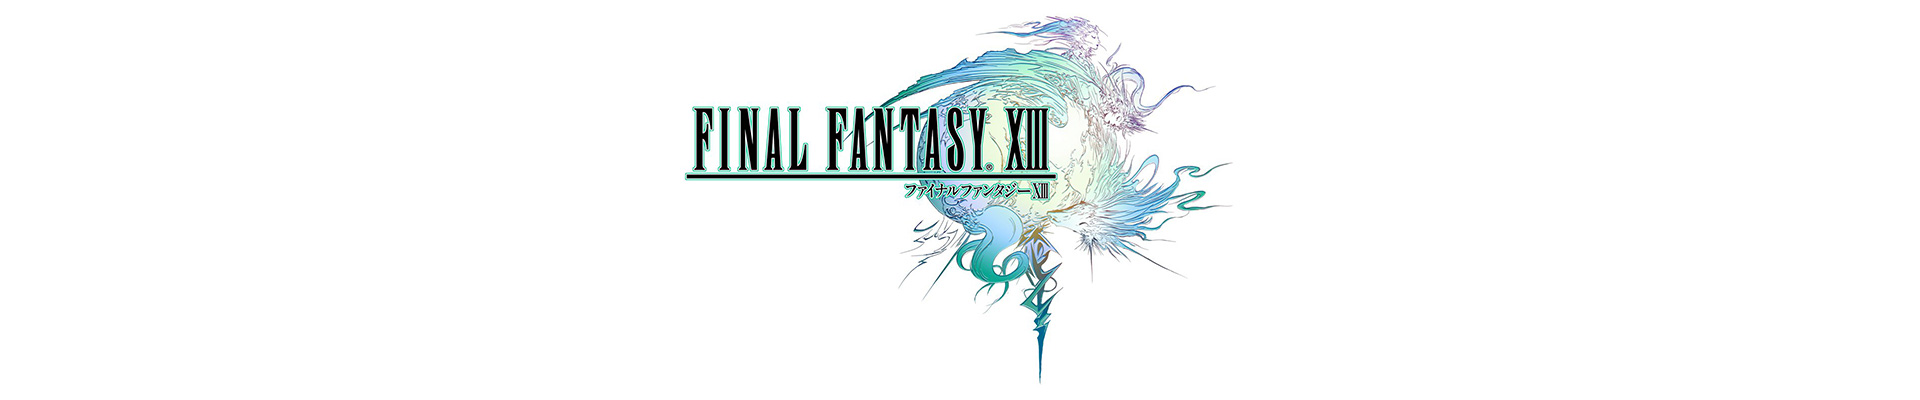 Thoughts on: Final Fantasy XIII